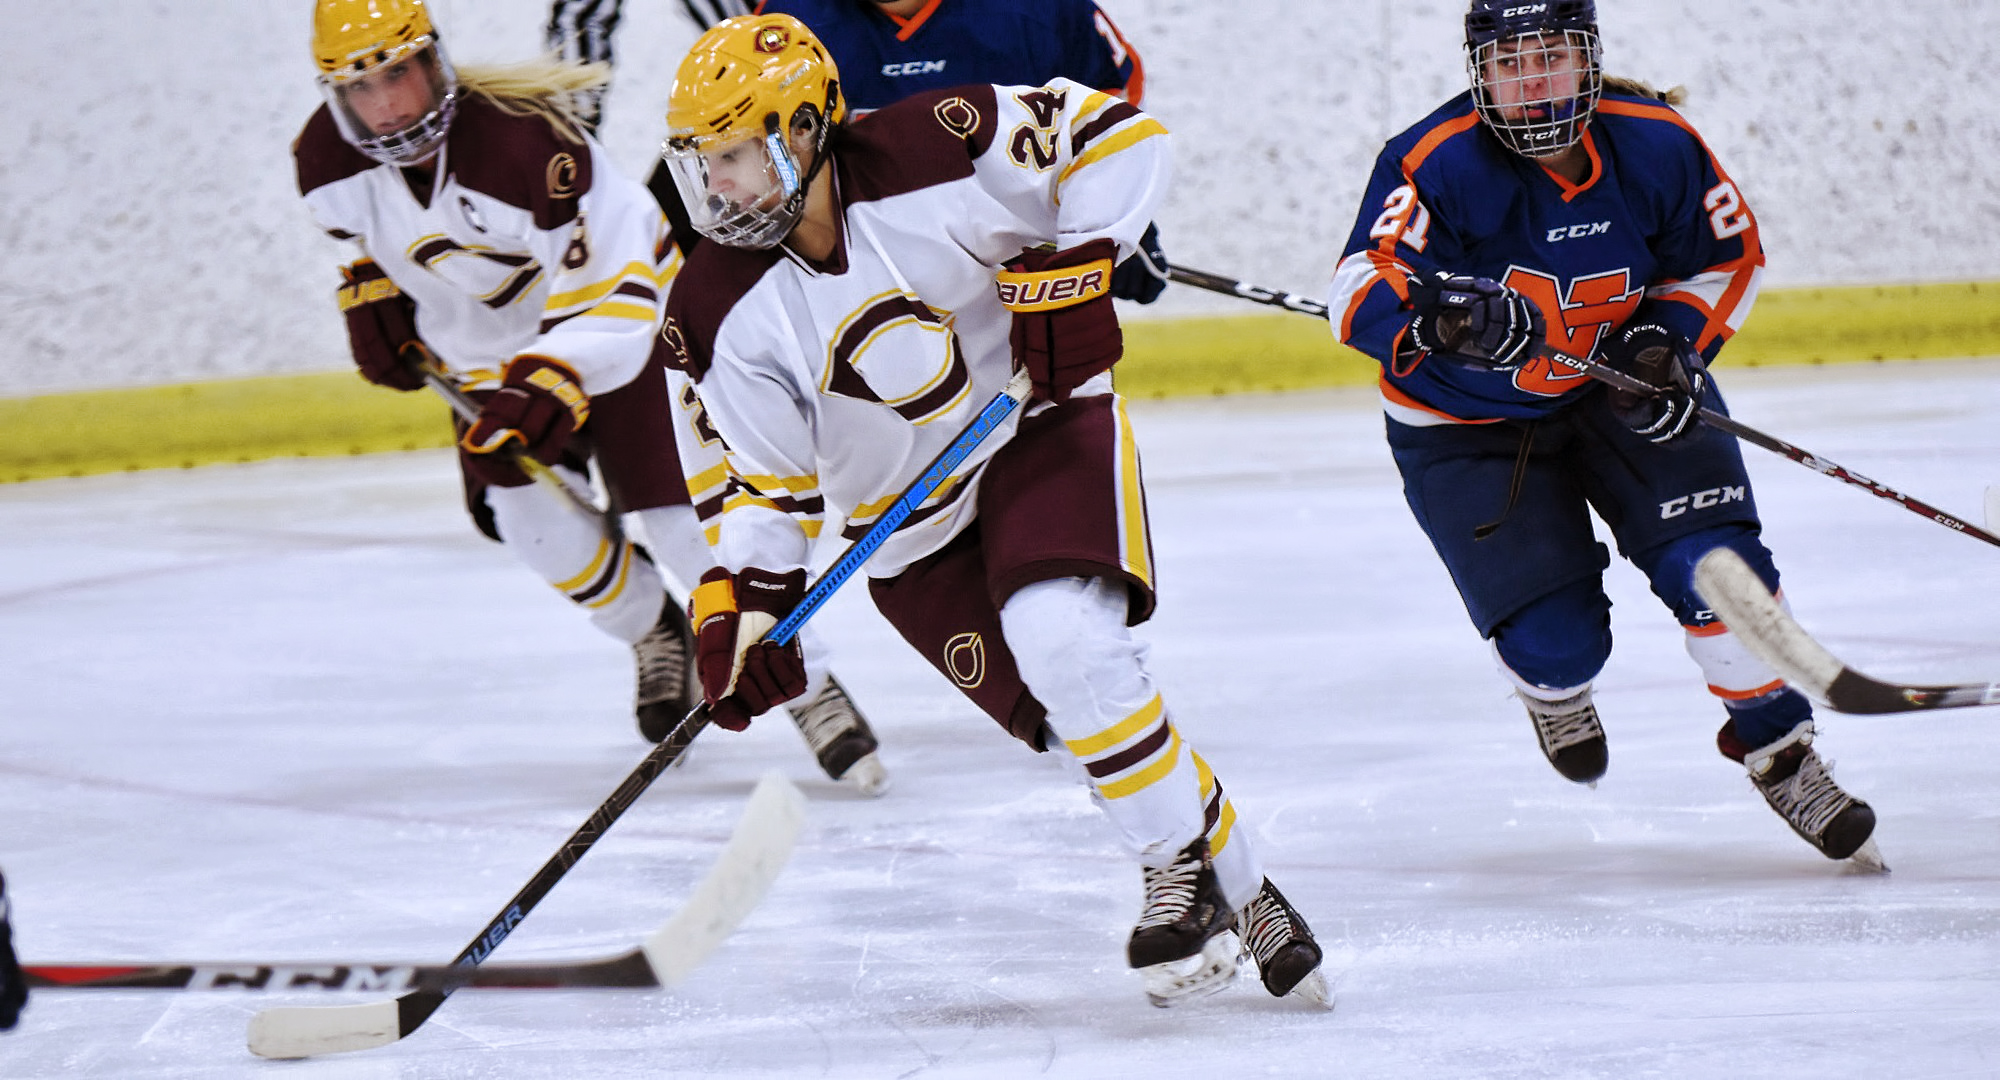 Kaitlyn Page scored the game-winning goal in overtime as Concordia swept Northland.